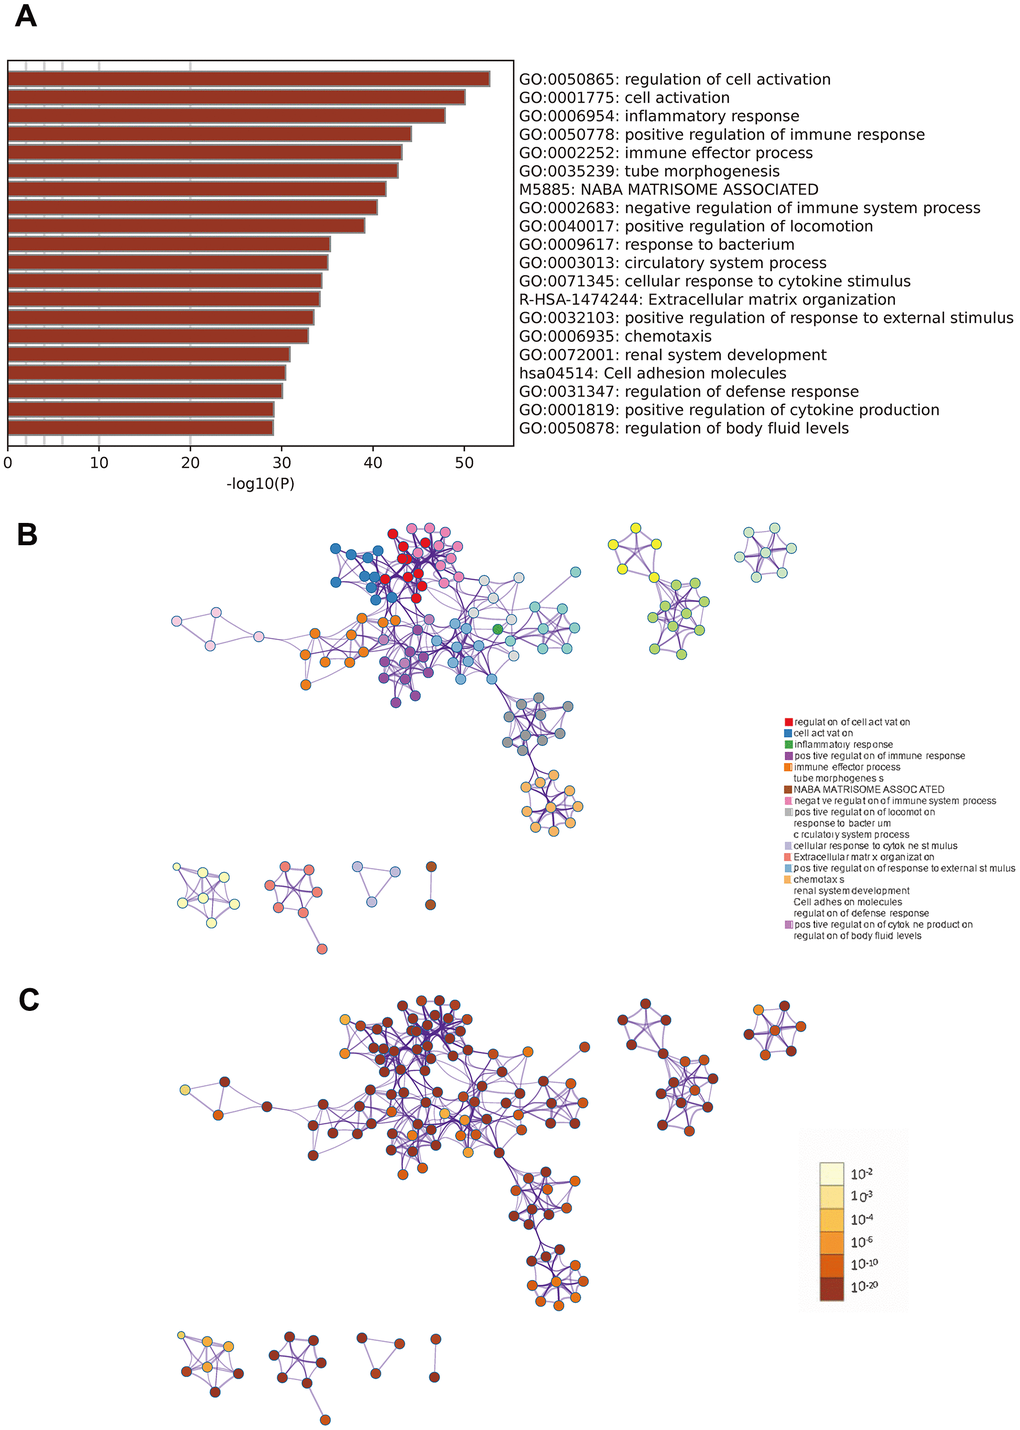 Metascape enrichment analysis. (A) Heatmap of enriched terms across input differently expressed gene lists, colored by p-values. (B) Network of enriched terms colored by cluster identity. (C) Network of enriched terms colored by p-value.